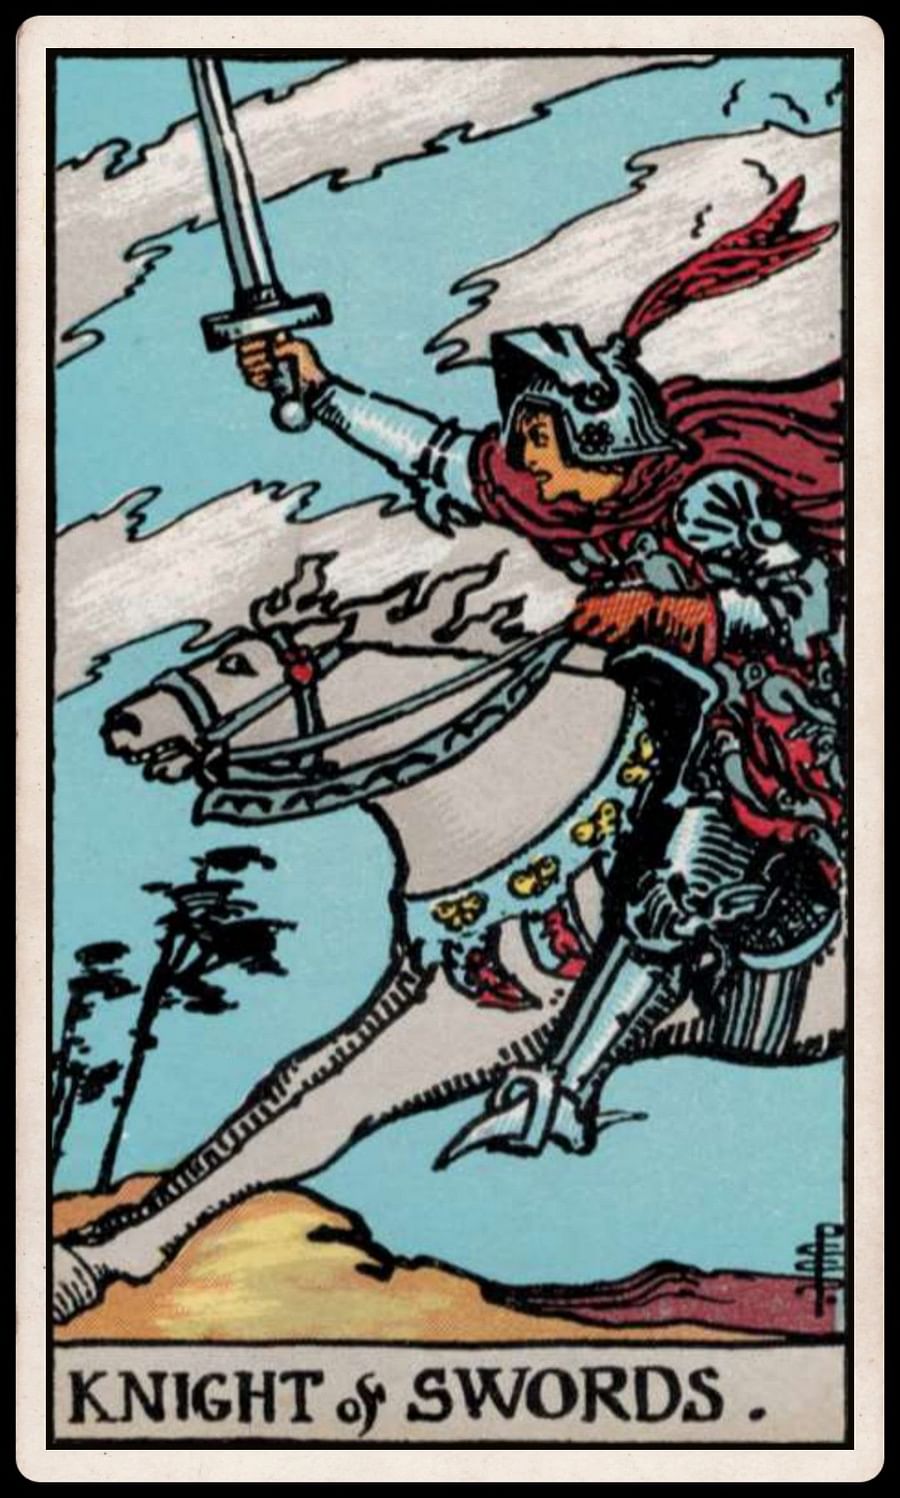 Knight of Swords tarot card depicting a knight riding fiercely with a sword held high